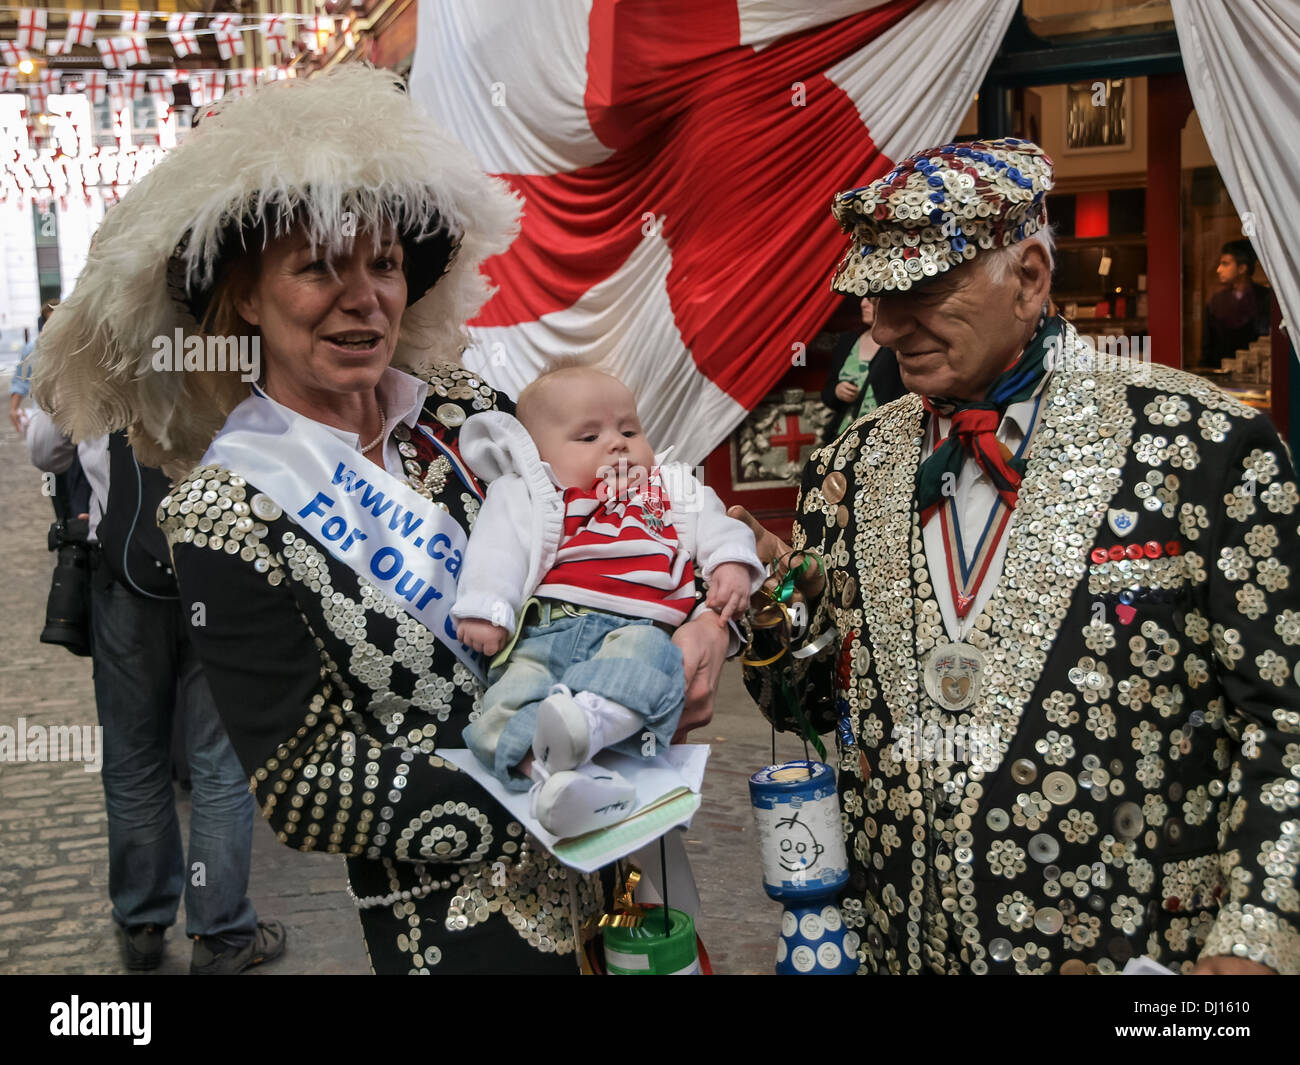 Pearly Queen & Pearly King with a baby, whilst collecting for children's charities in London. Stock Photo